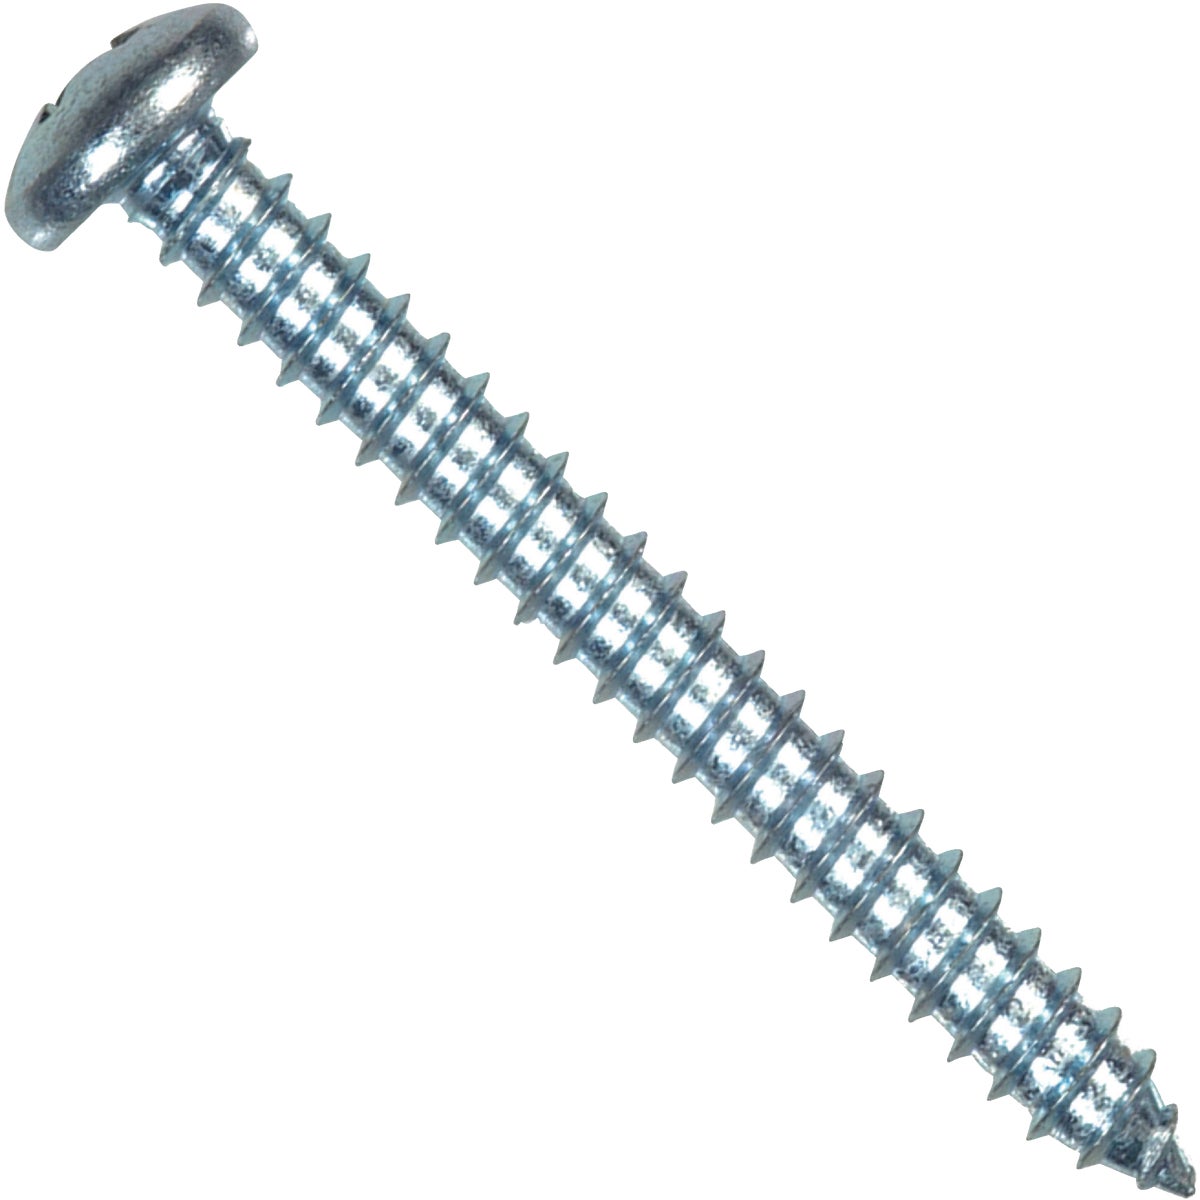 Item 720976, Pan head Phillips sheet metal screws are designed to attach metal to metal